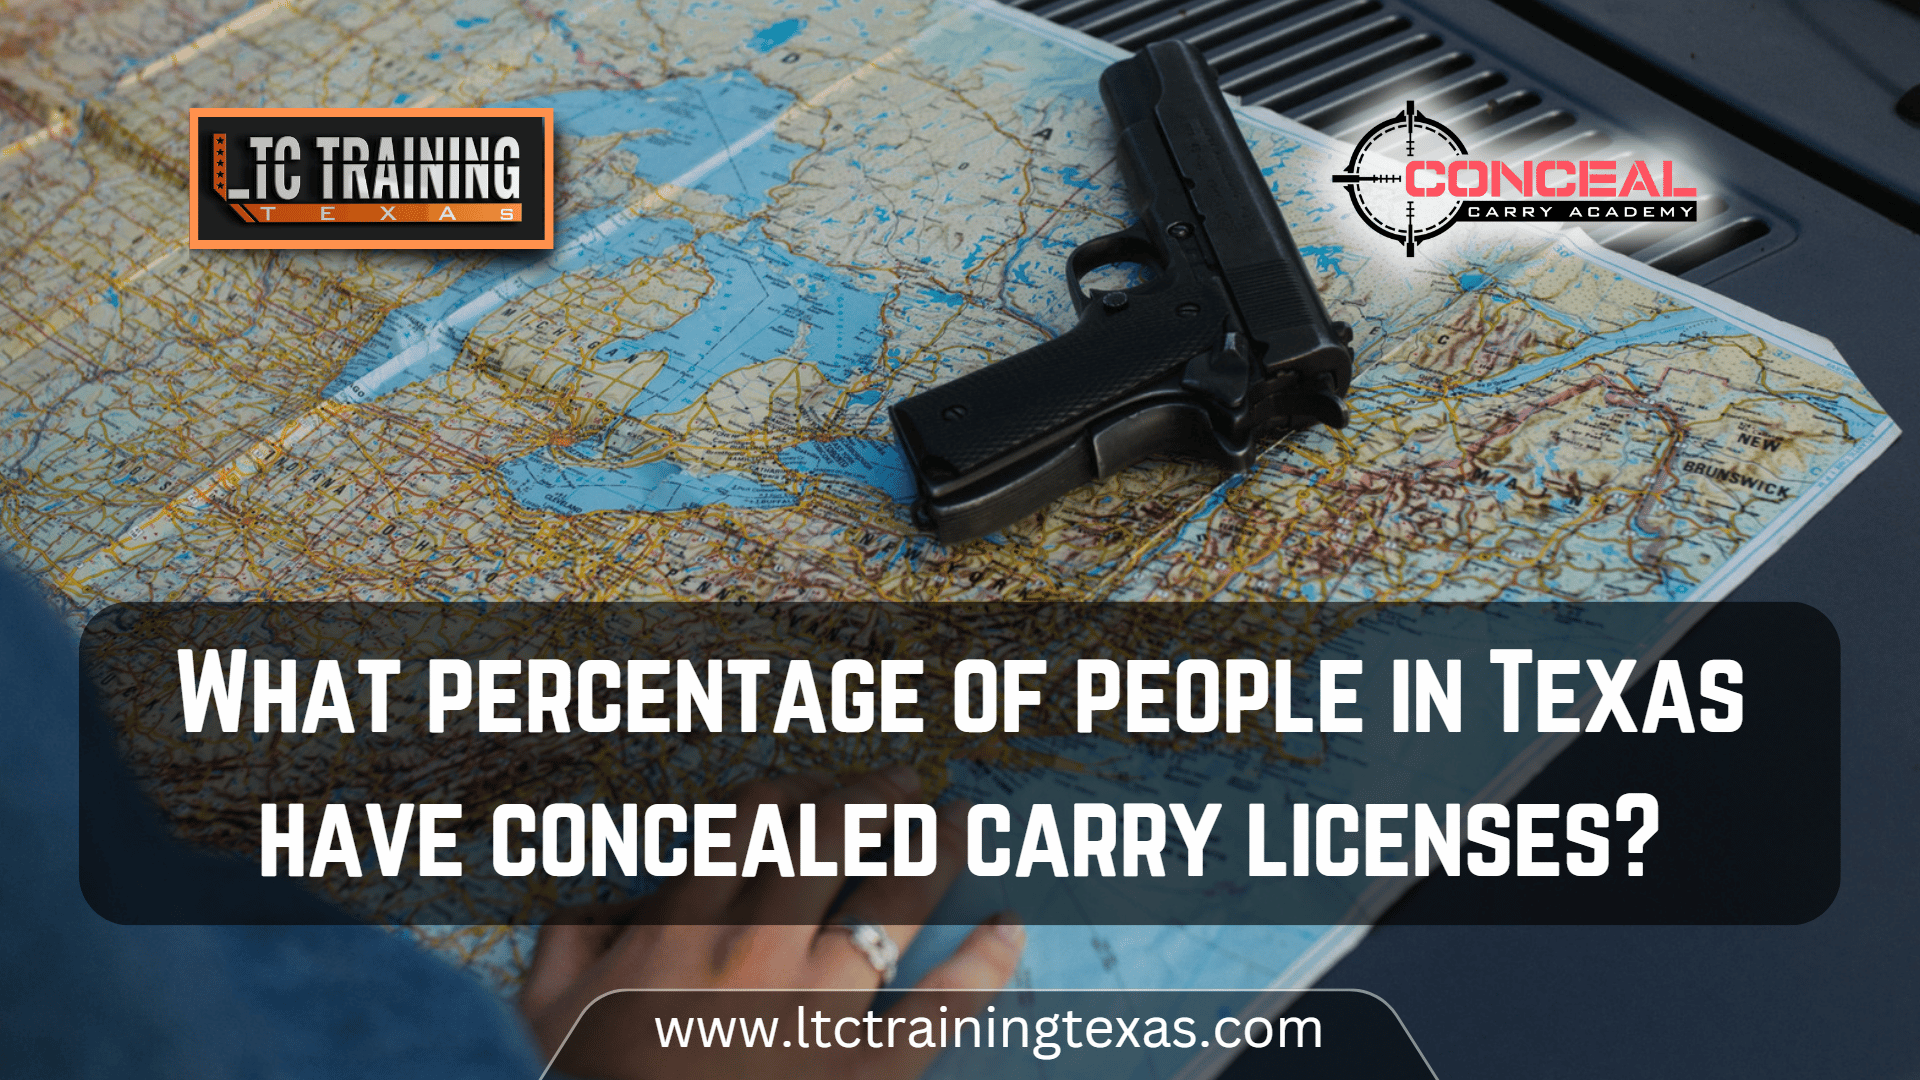 What percentage of people in Texas have concealed carry licenses?